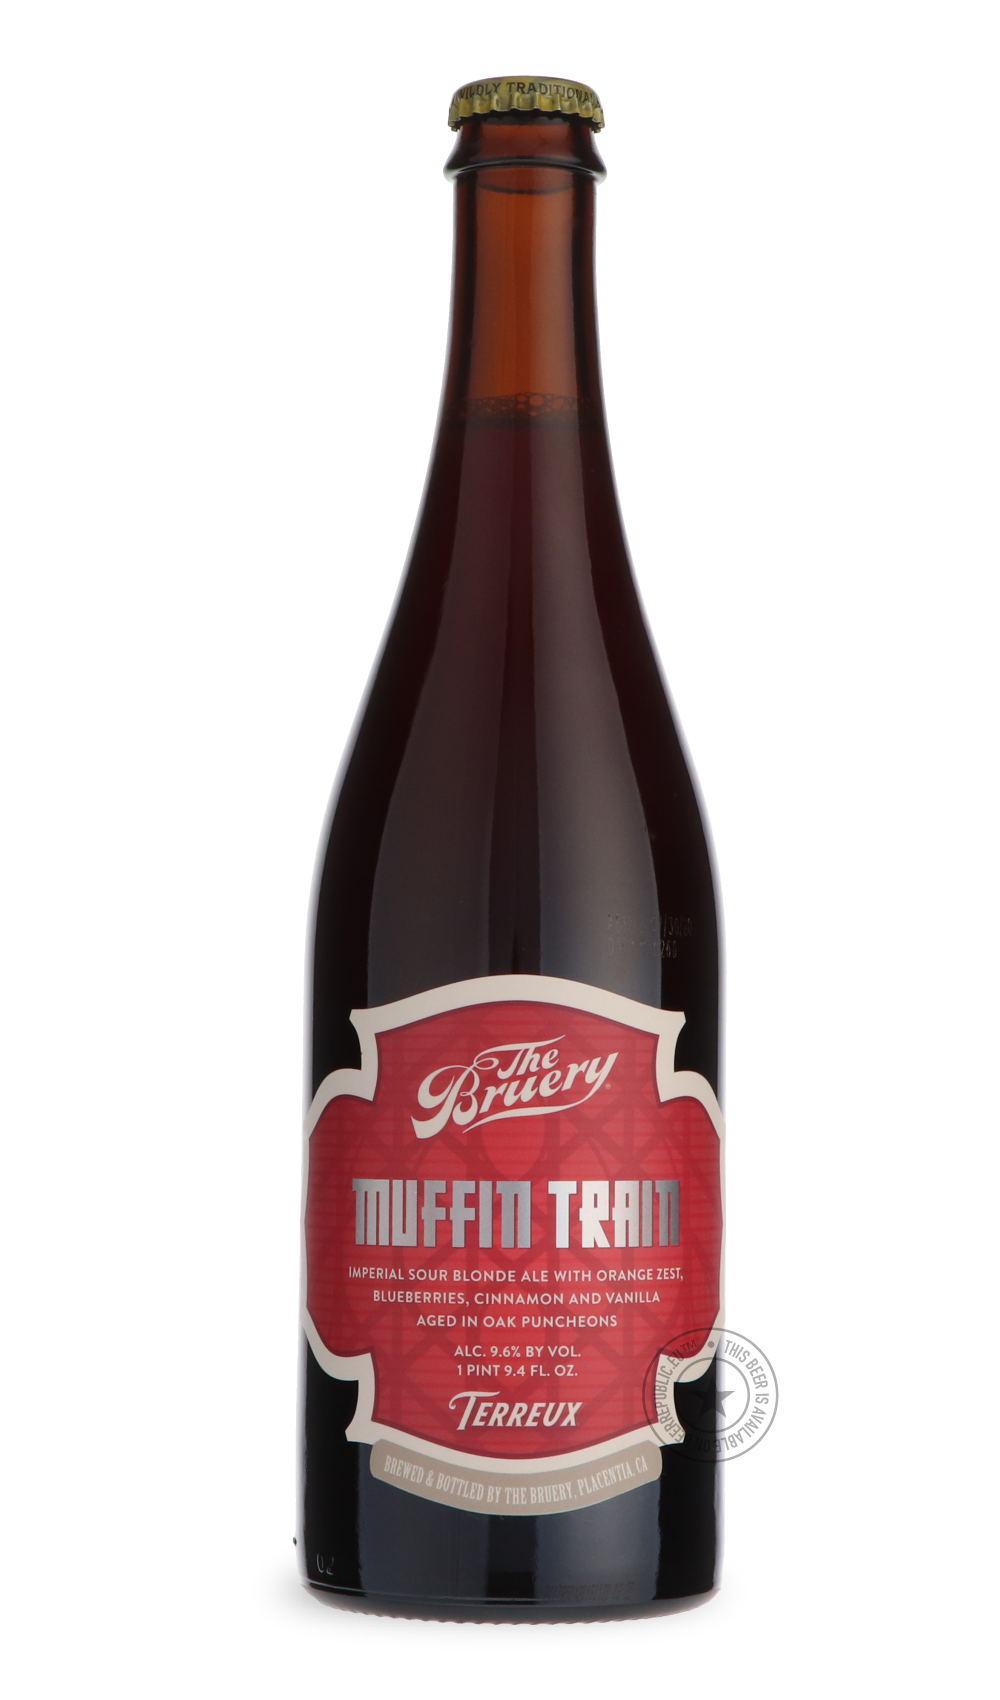 -The Bruery- Terreux Muffin Train-Sour / Wild & Fruity- Only @ Beer Republic - The best online beer store for American & Canadian craft beer - Buy beer online from the USA and Canada - Bier online kopen - Amerikaans bier kopen - Craft beer store - Craft beer kopen - Amerikanisch bier kaufen - Bier online kaufen - Acheter biere online - IPA - Stout - Porter - New England IPA - Hazy IPA - Imperial Stout - Barrel Aged - Barrel Aged Imperial Stout - Brown - Dark beer - Blond - Blonde - Pilsner - Lager - Wheat -